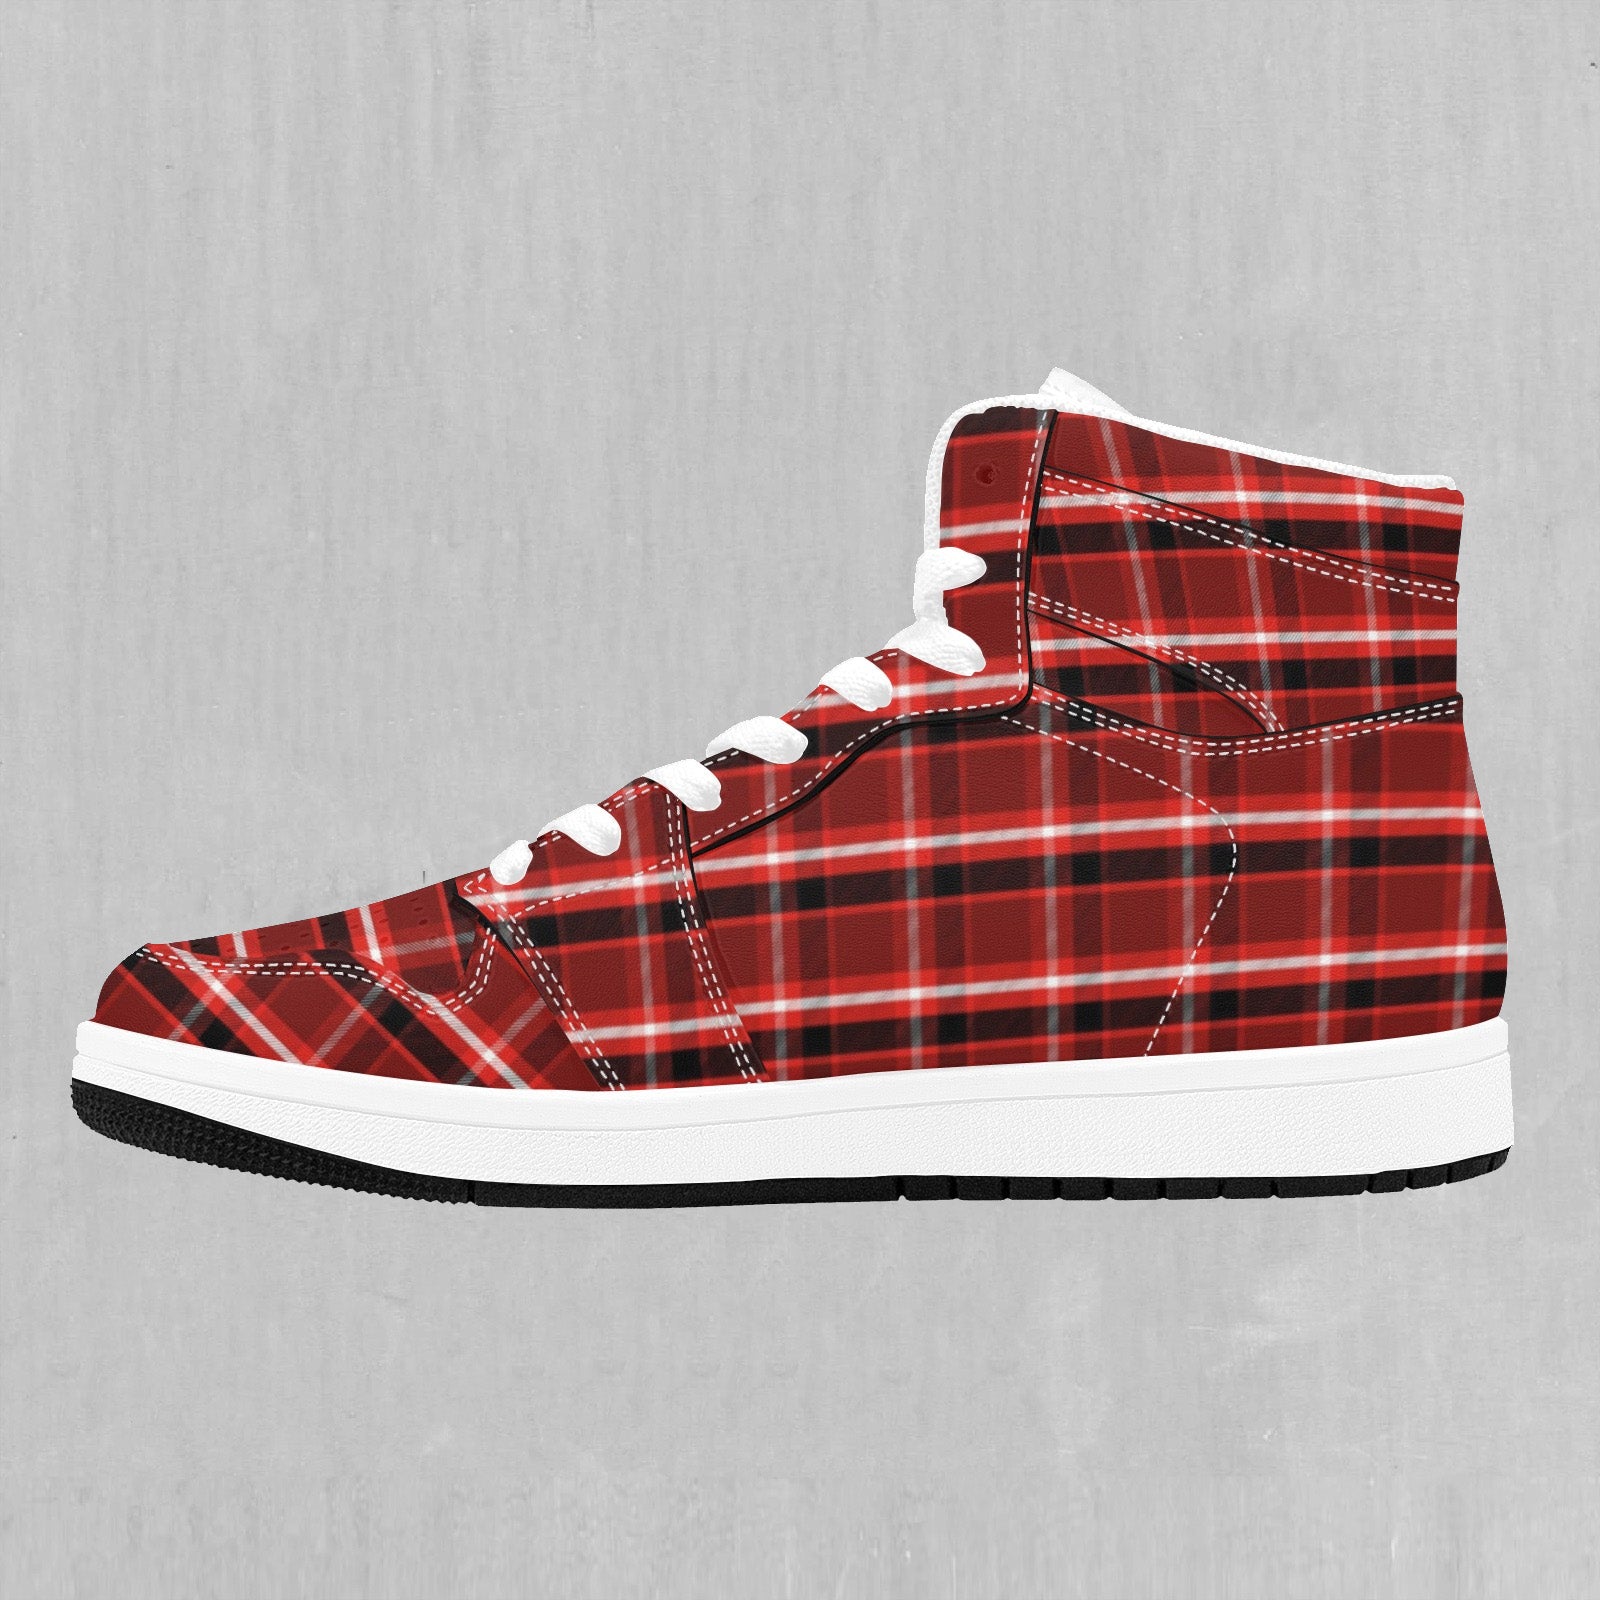 red high top vans outfit